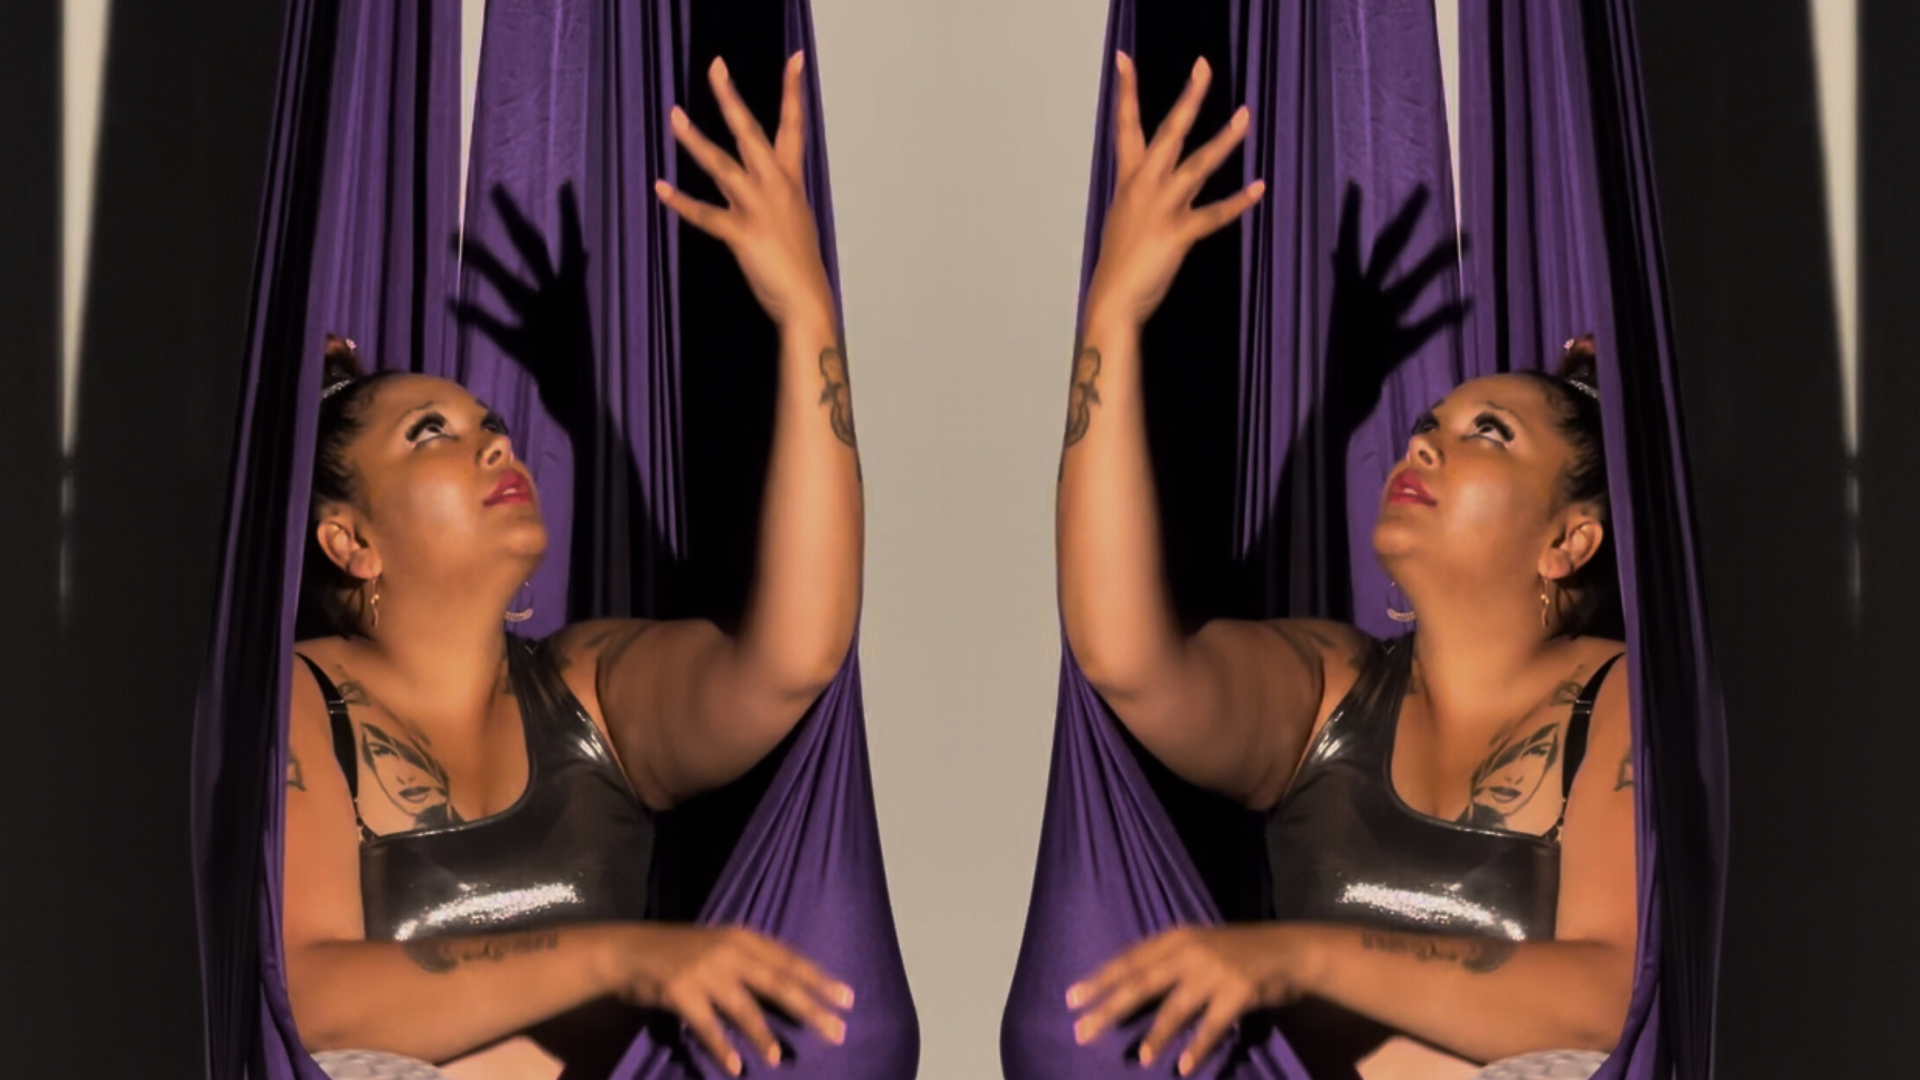 Gaitrie sits in a purple fabric used for aerial swings. The image is mirrored, so you see two Gaitries and two swings.